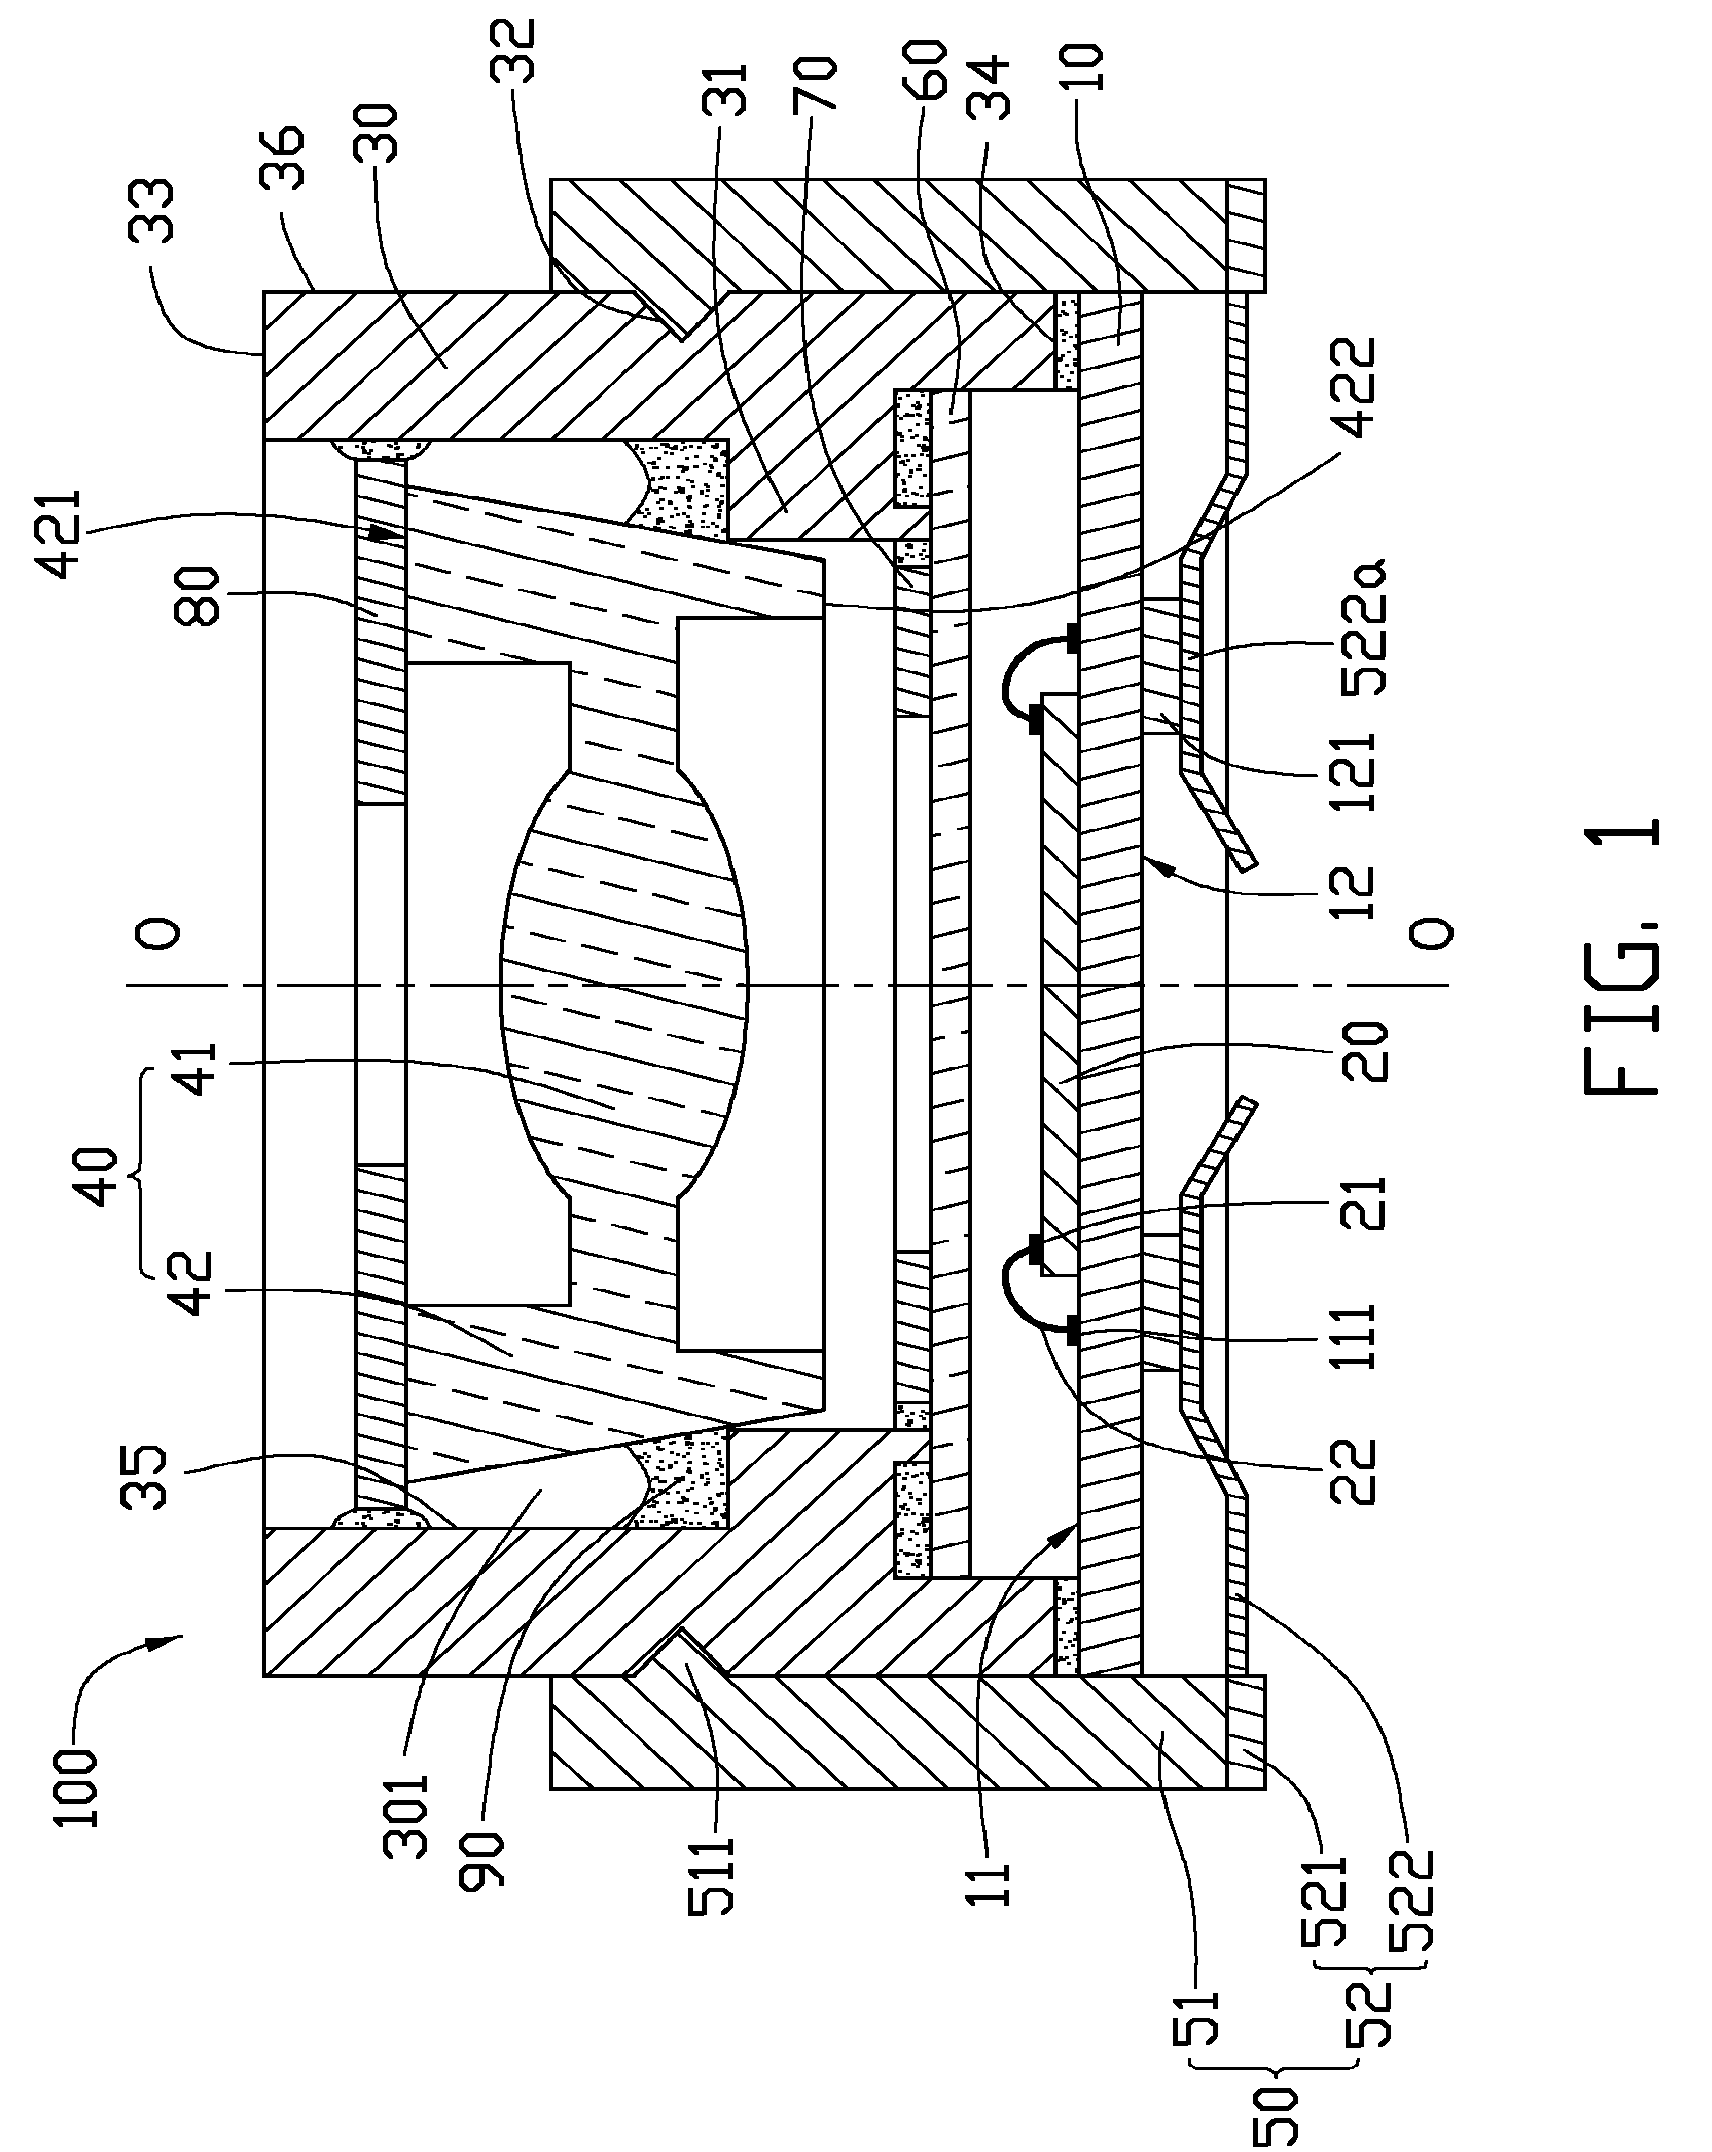 Optical imaging module with fixed-focus lens